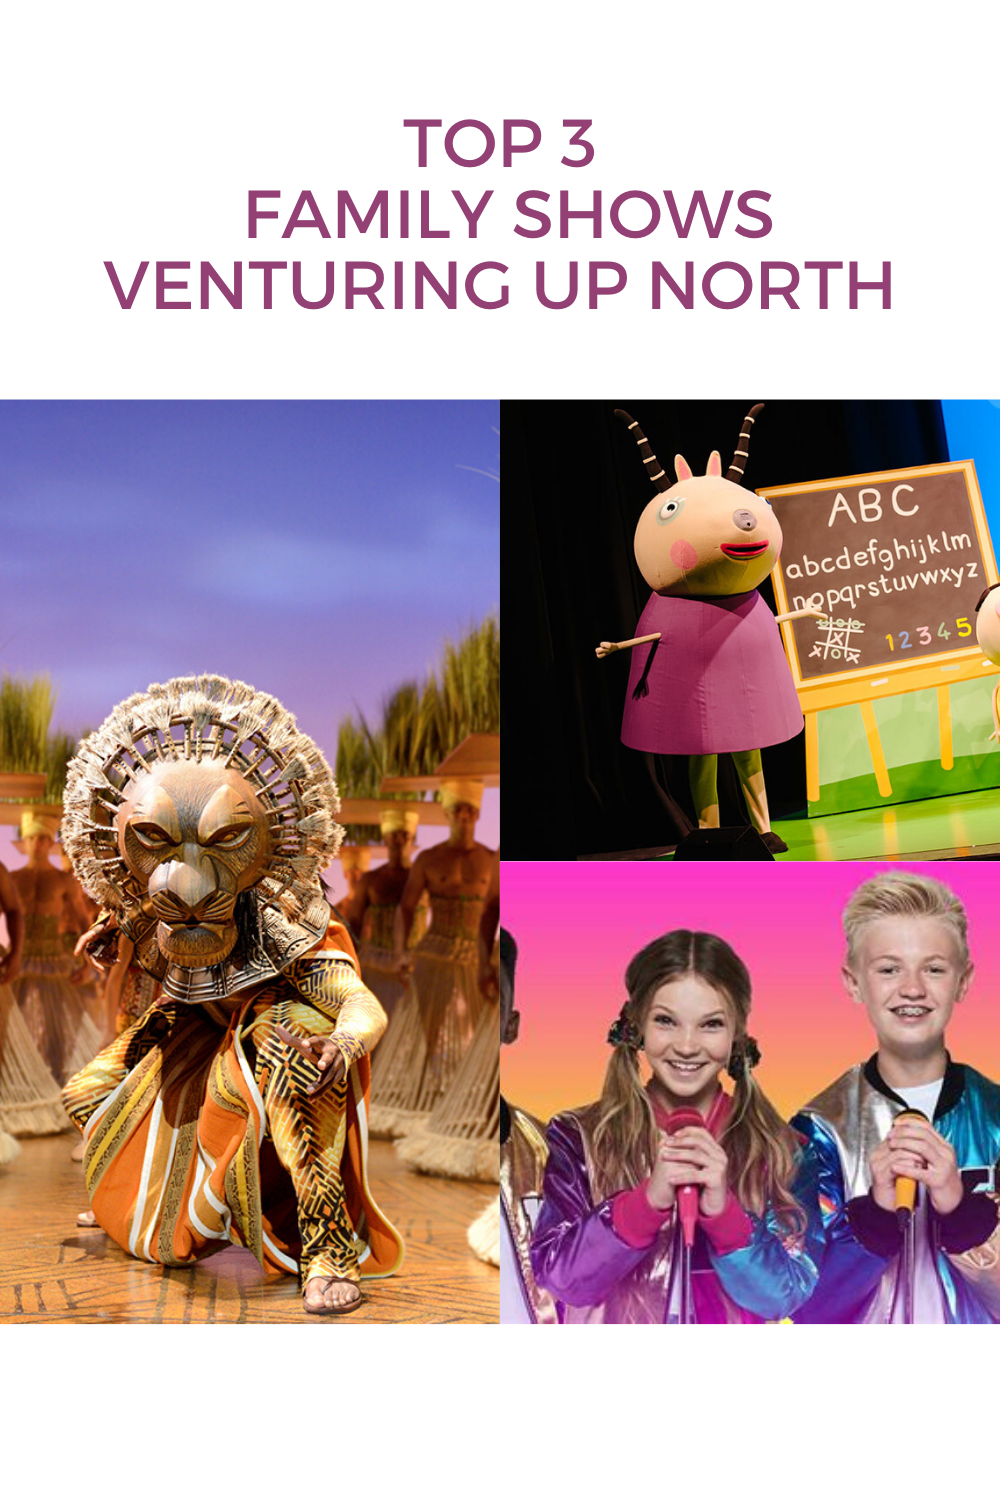 Top 3 family shows venturing up north